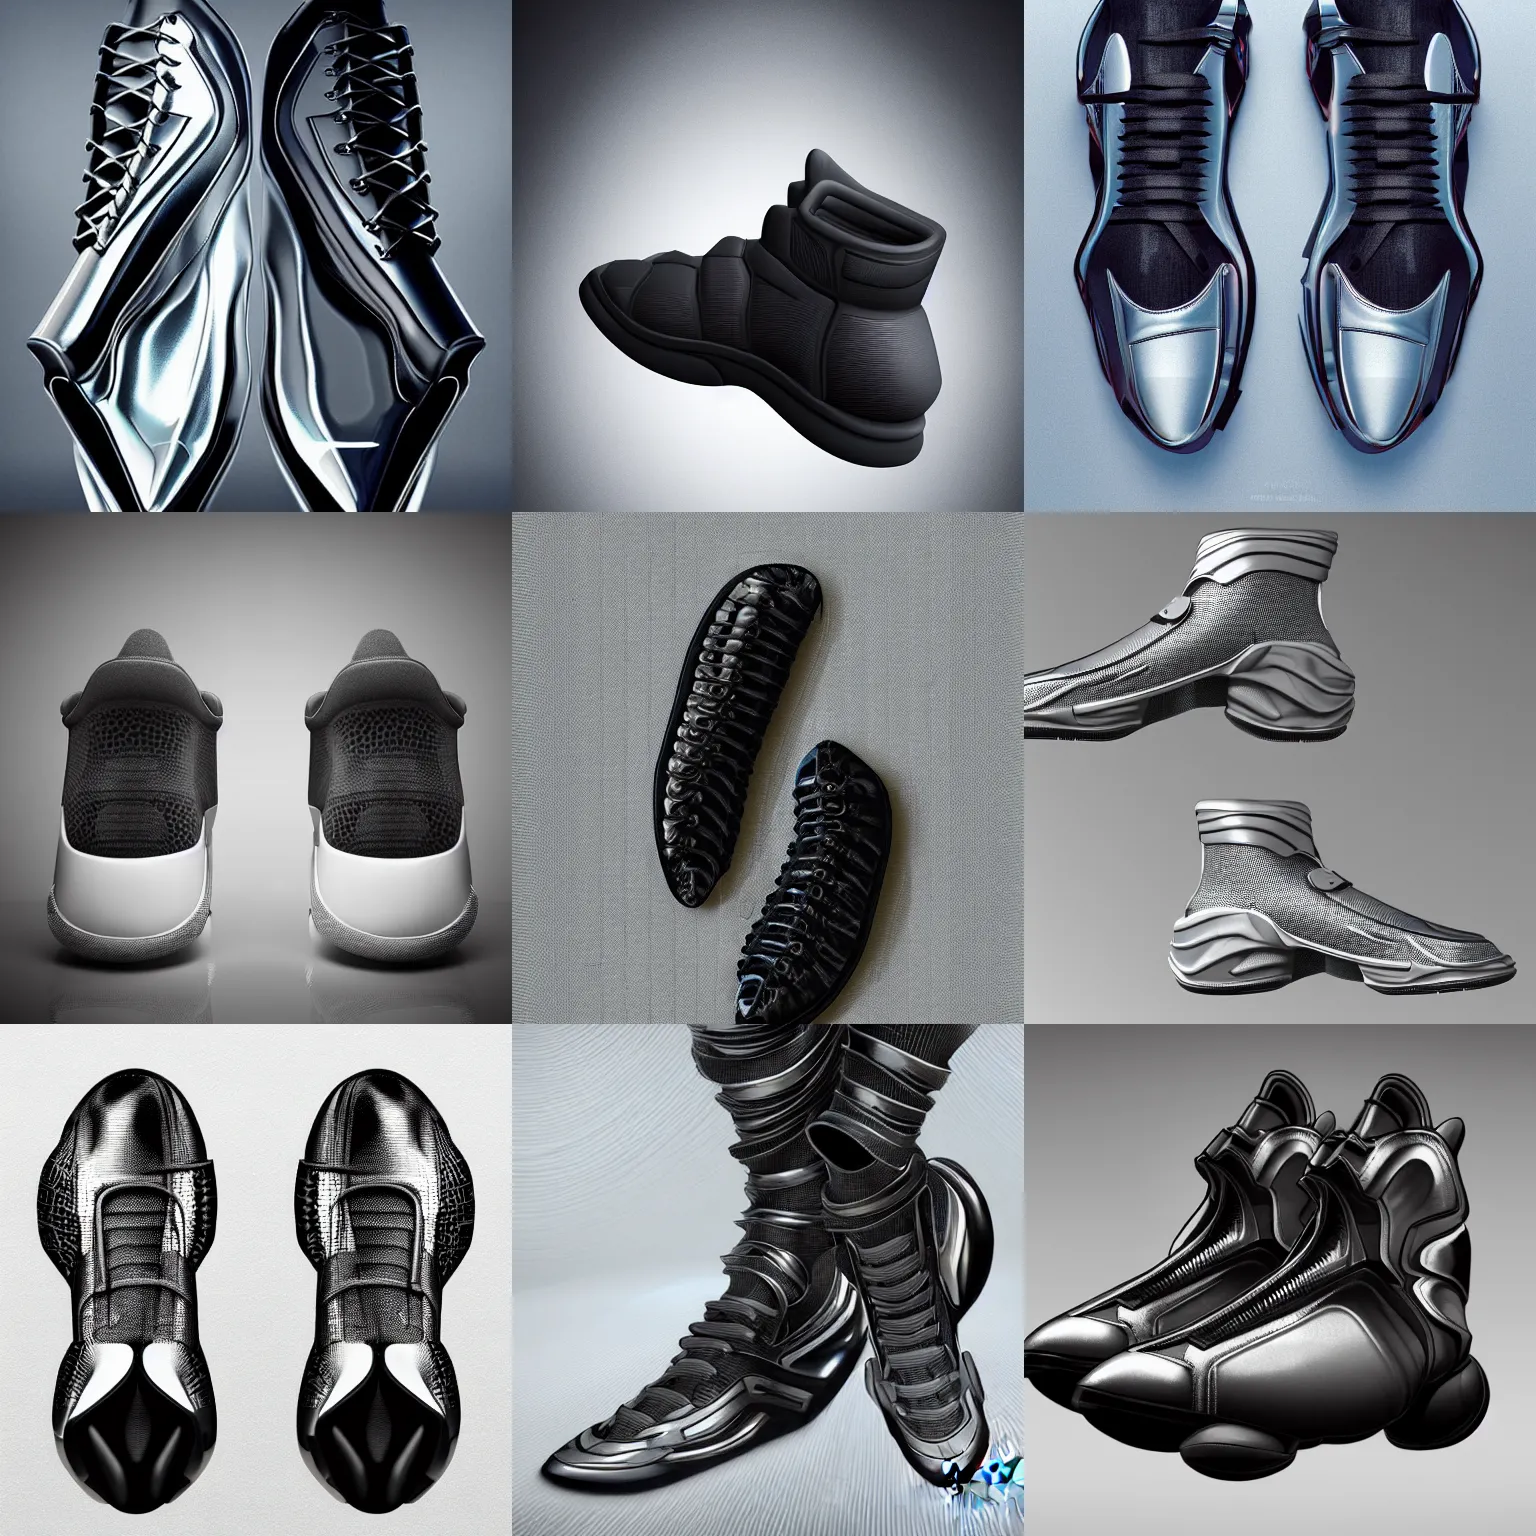 futuristic balenciaga and vetements sneakers in giger